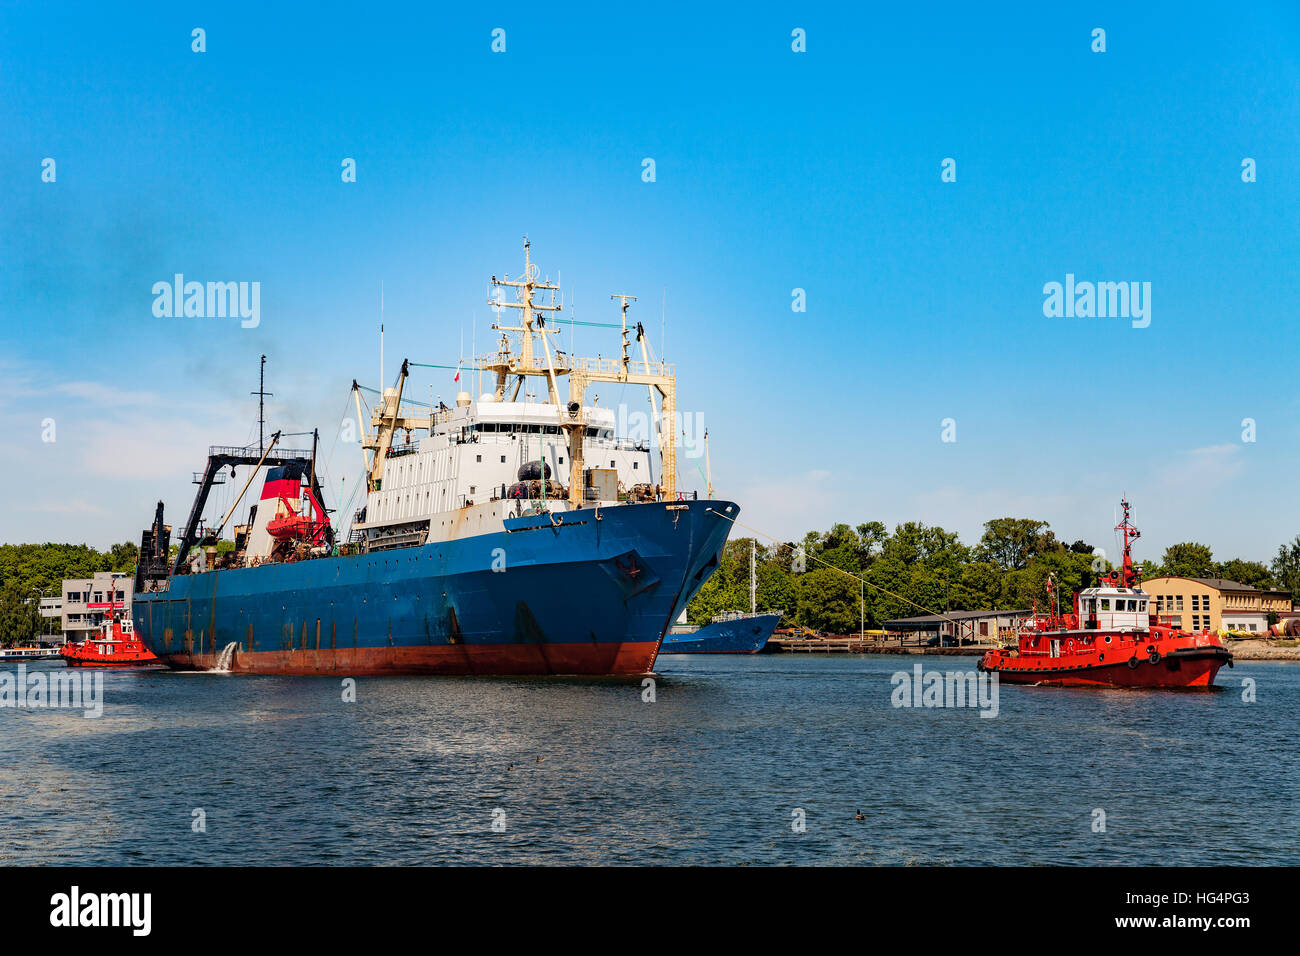 Tugboat towing fishing ship in port of Gdansk, Poland. Stock Photo